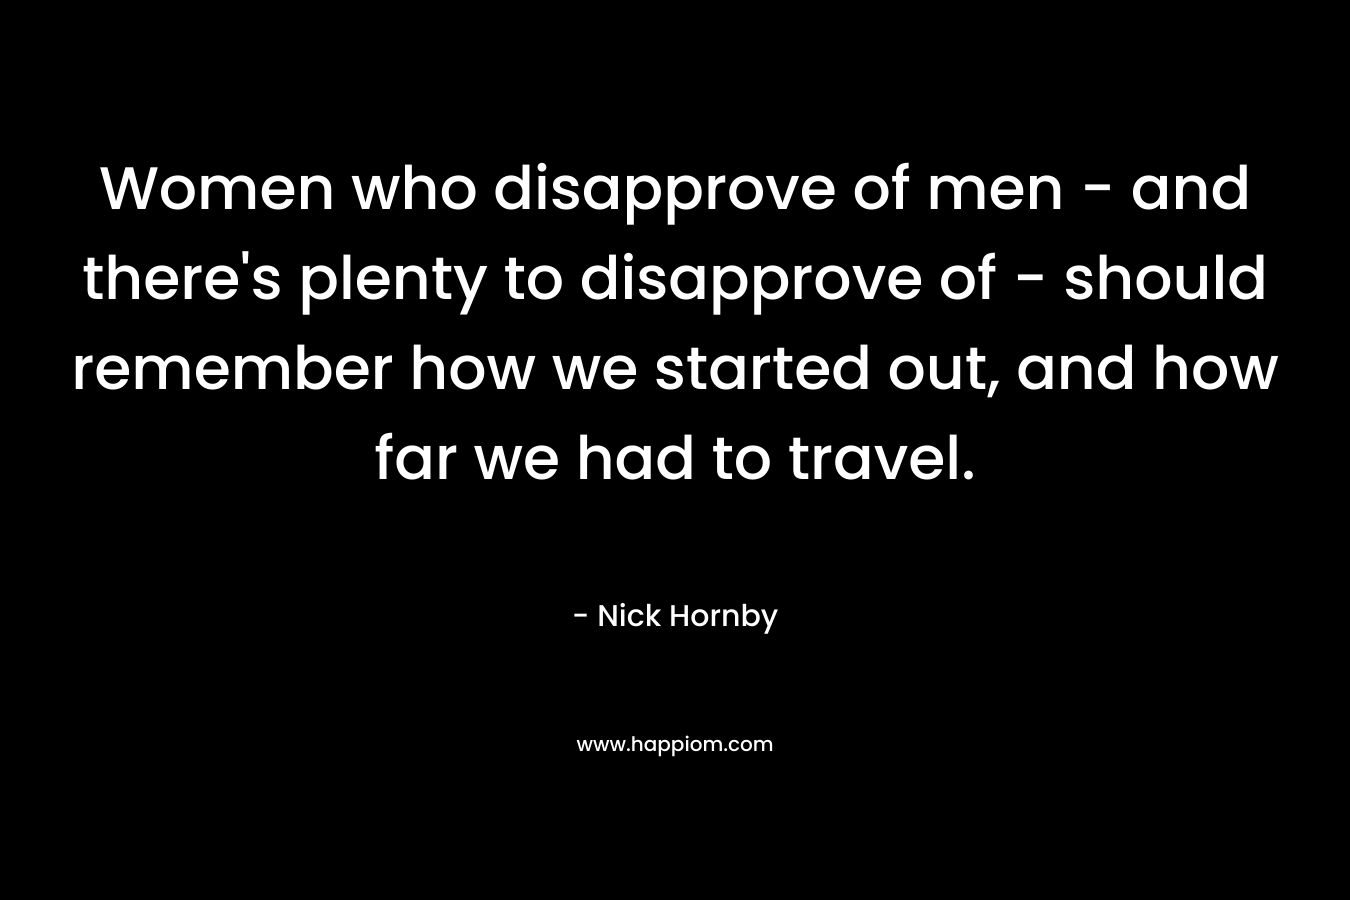 Women who disapprove of men - and there's plenty to disapprove of - should remember how we started out, and how far we had to travel.